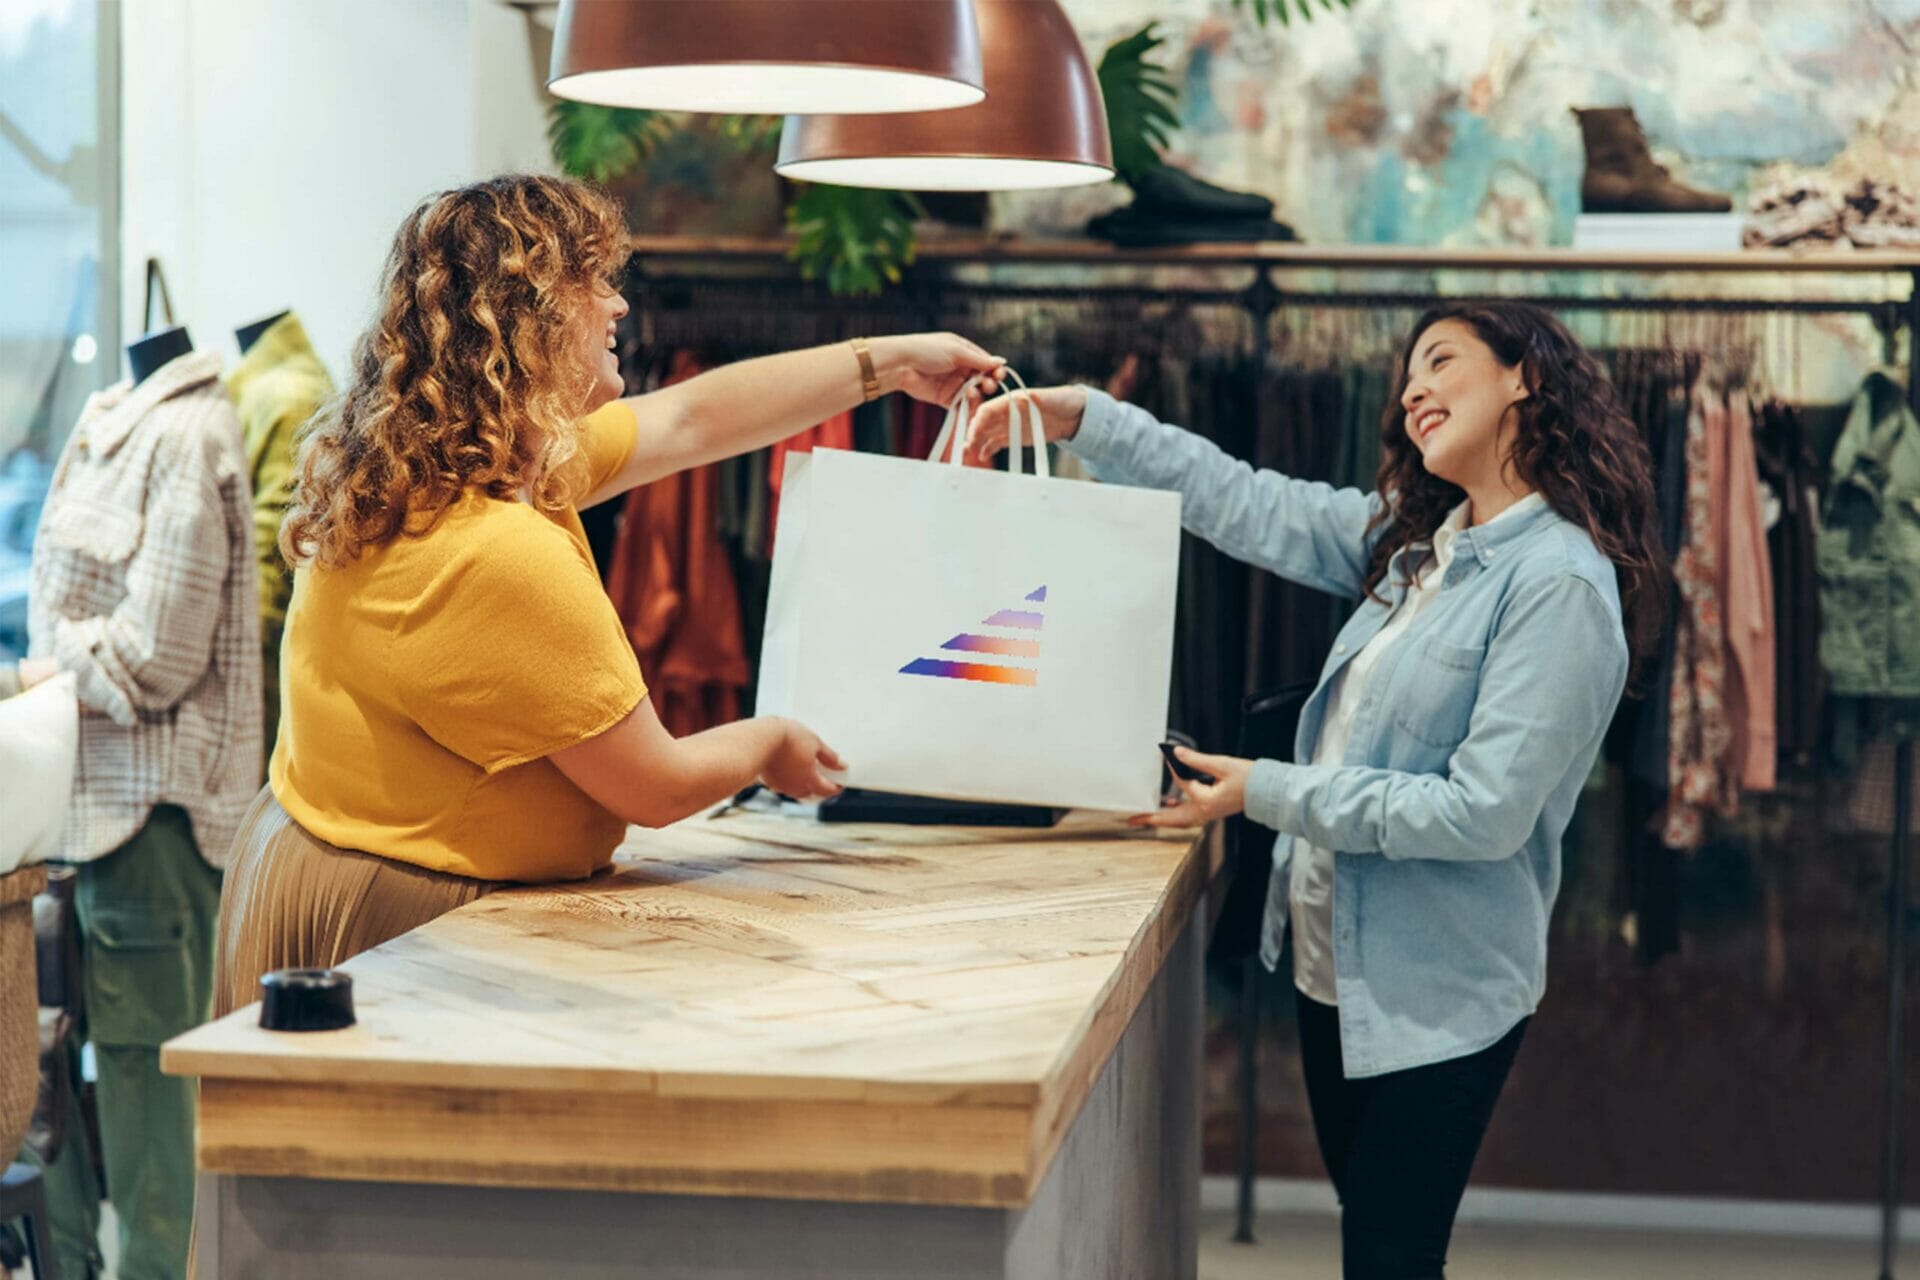 Explore Amazon's transformative influence on traditional retail and how the challenges and adaptations are shaping the future of ecommerce.